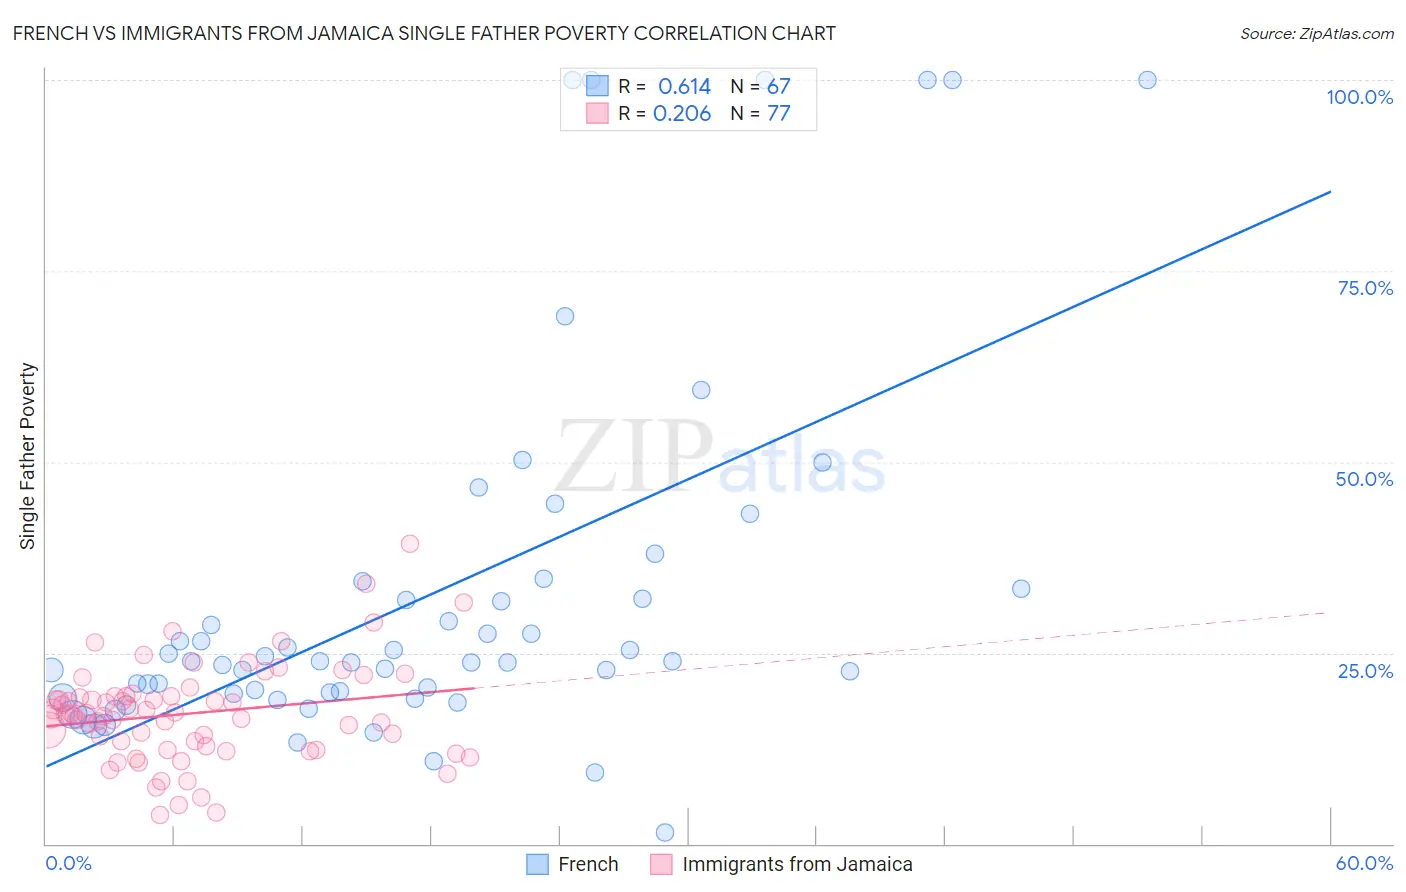 French vs Immigrants from Jamaica Single Father Poverty